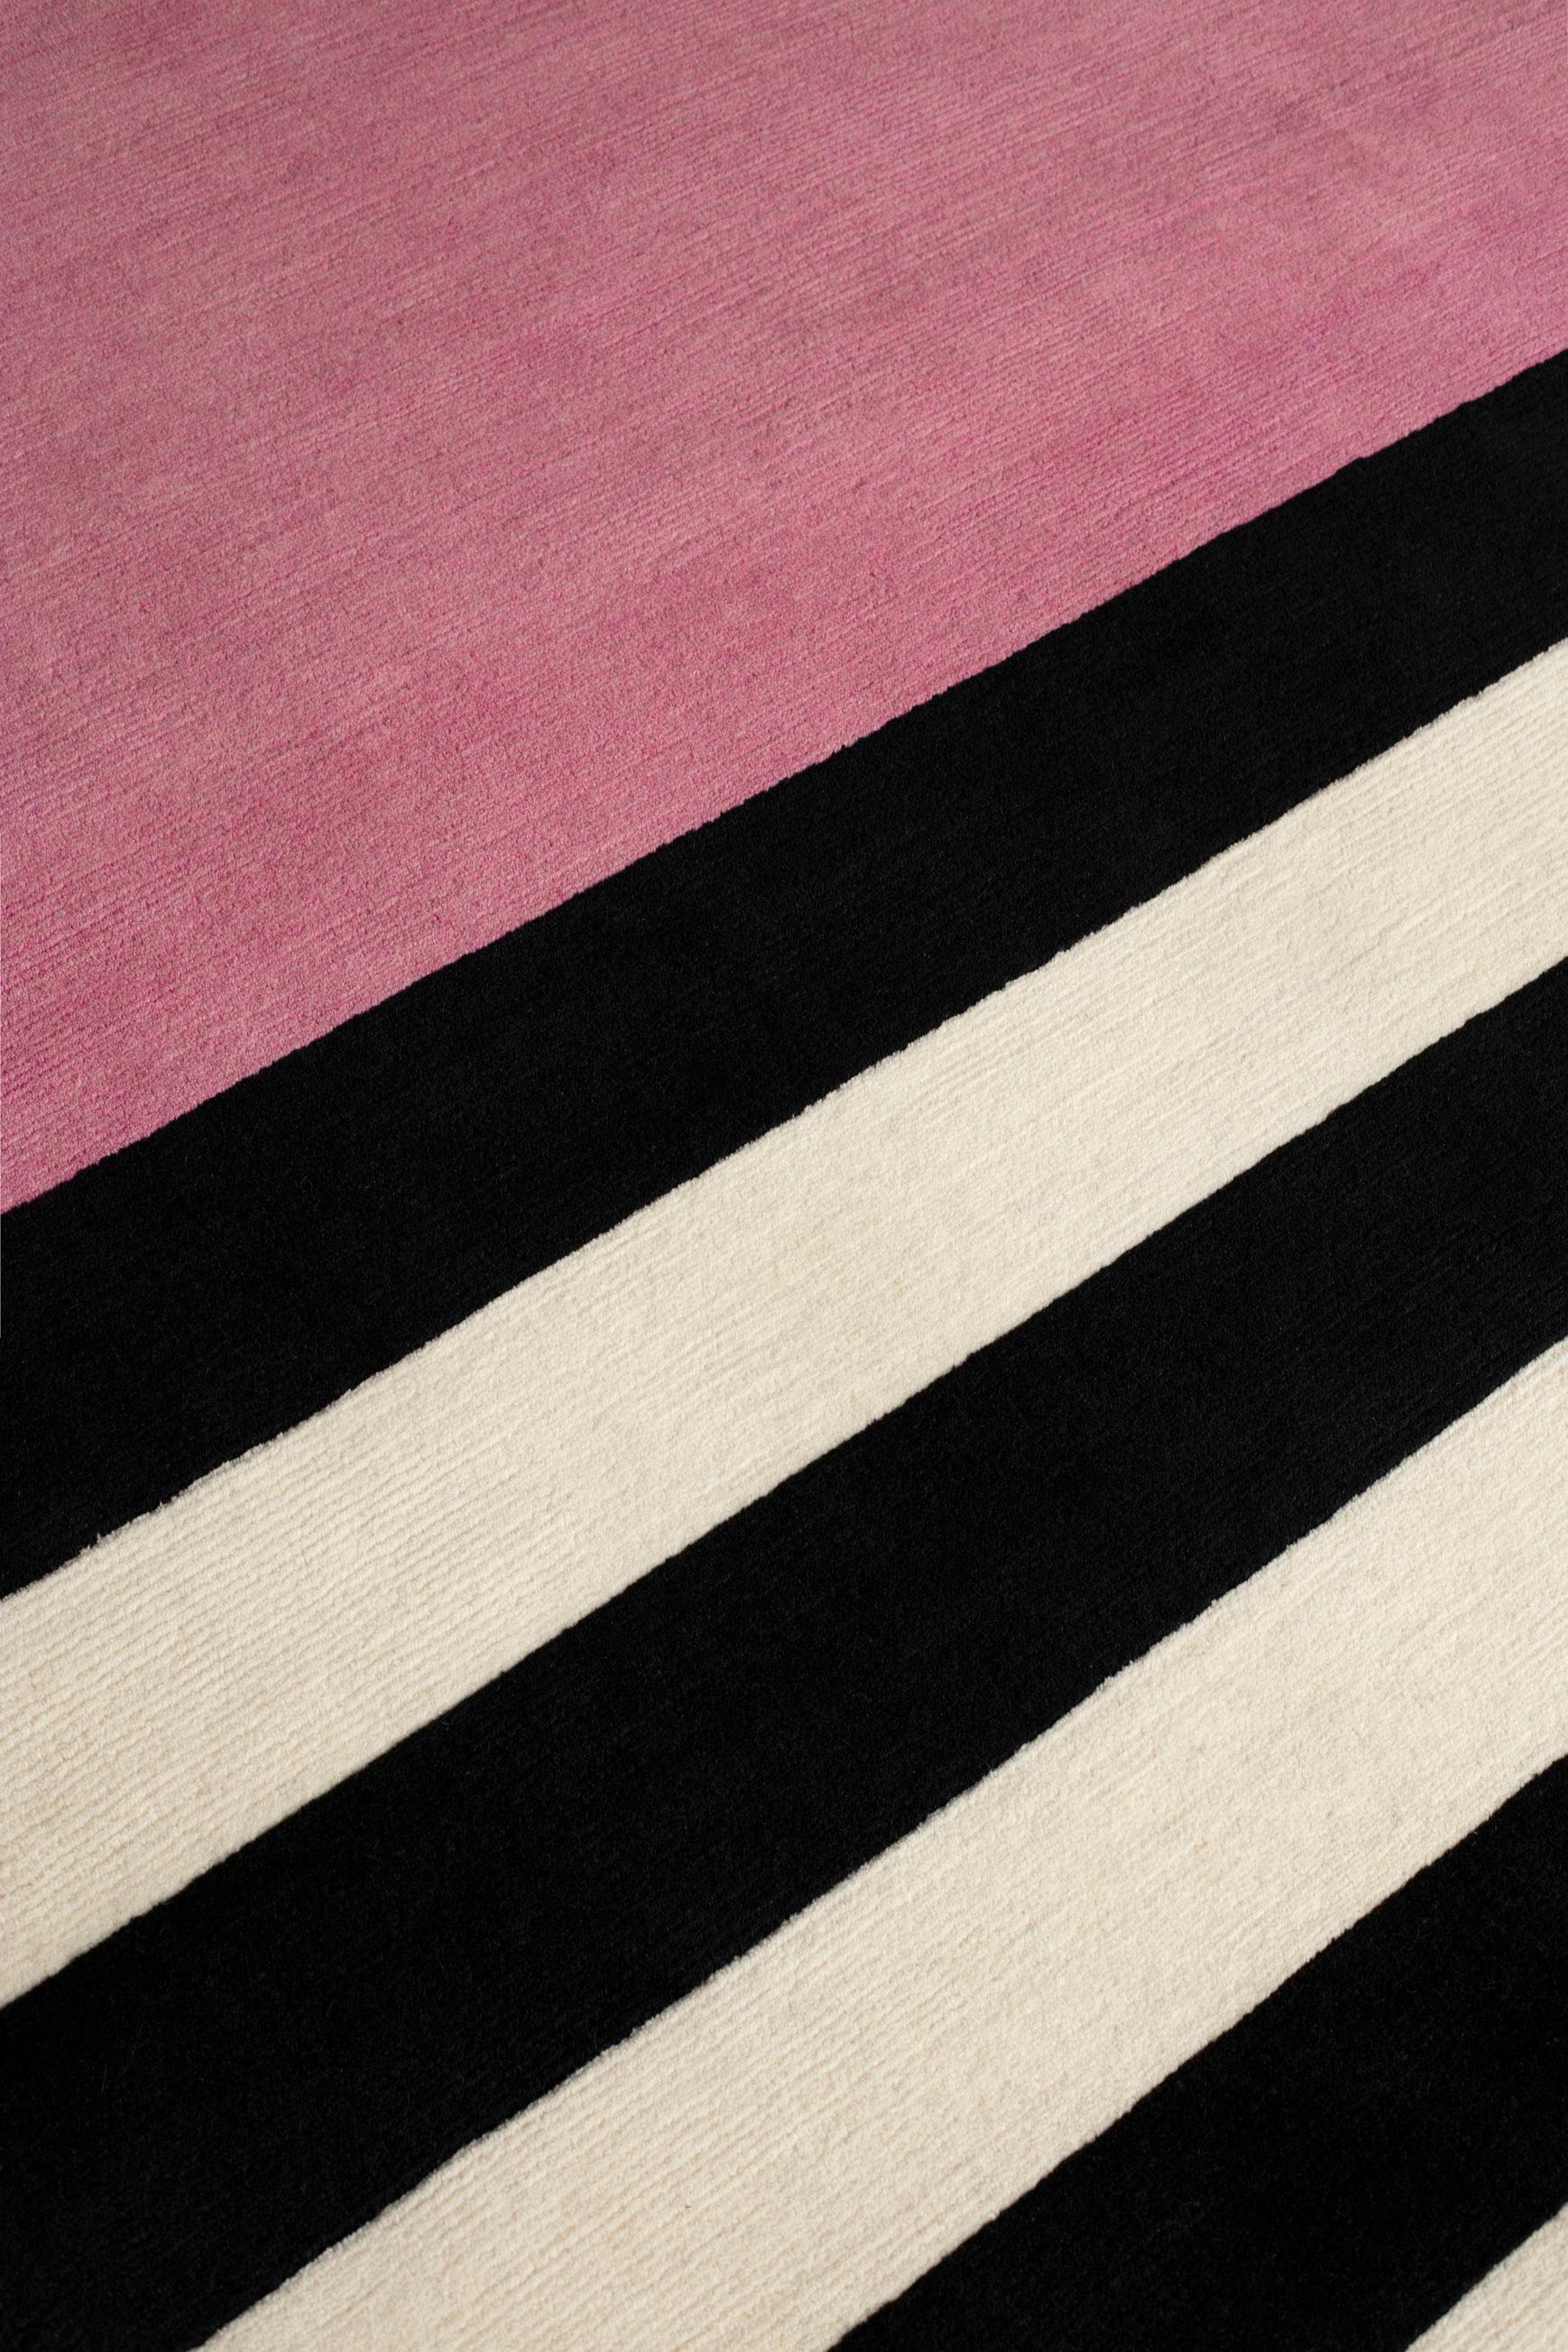 Hand-Knotted cc-tapis Noir Blanc Les Arcs Collection by Charlotte Perriand - IN STOCK For Sale